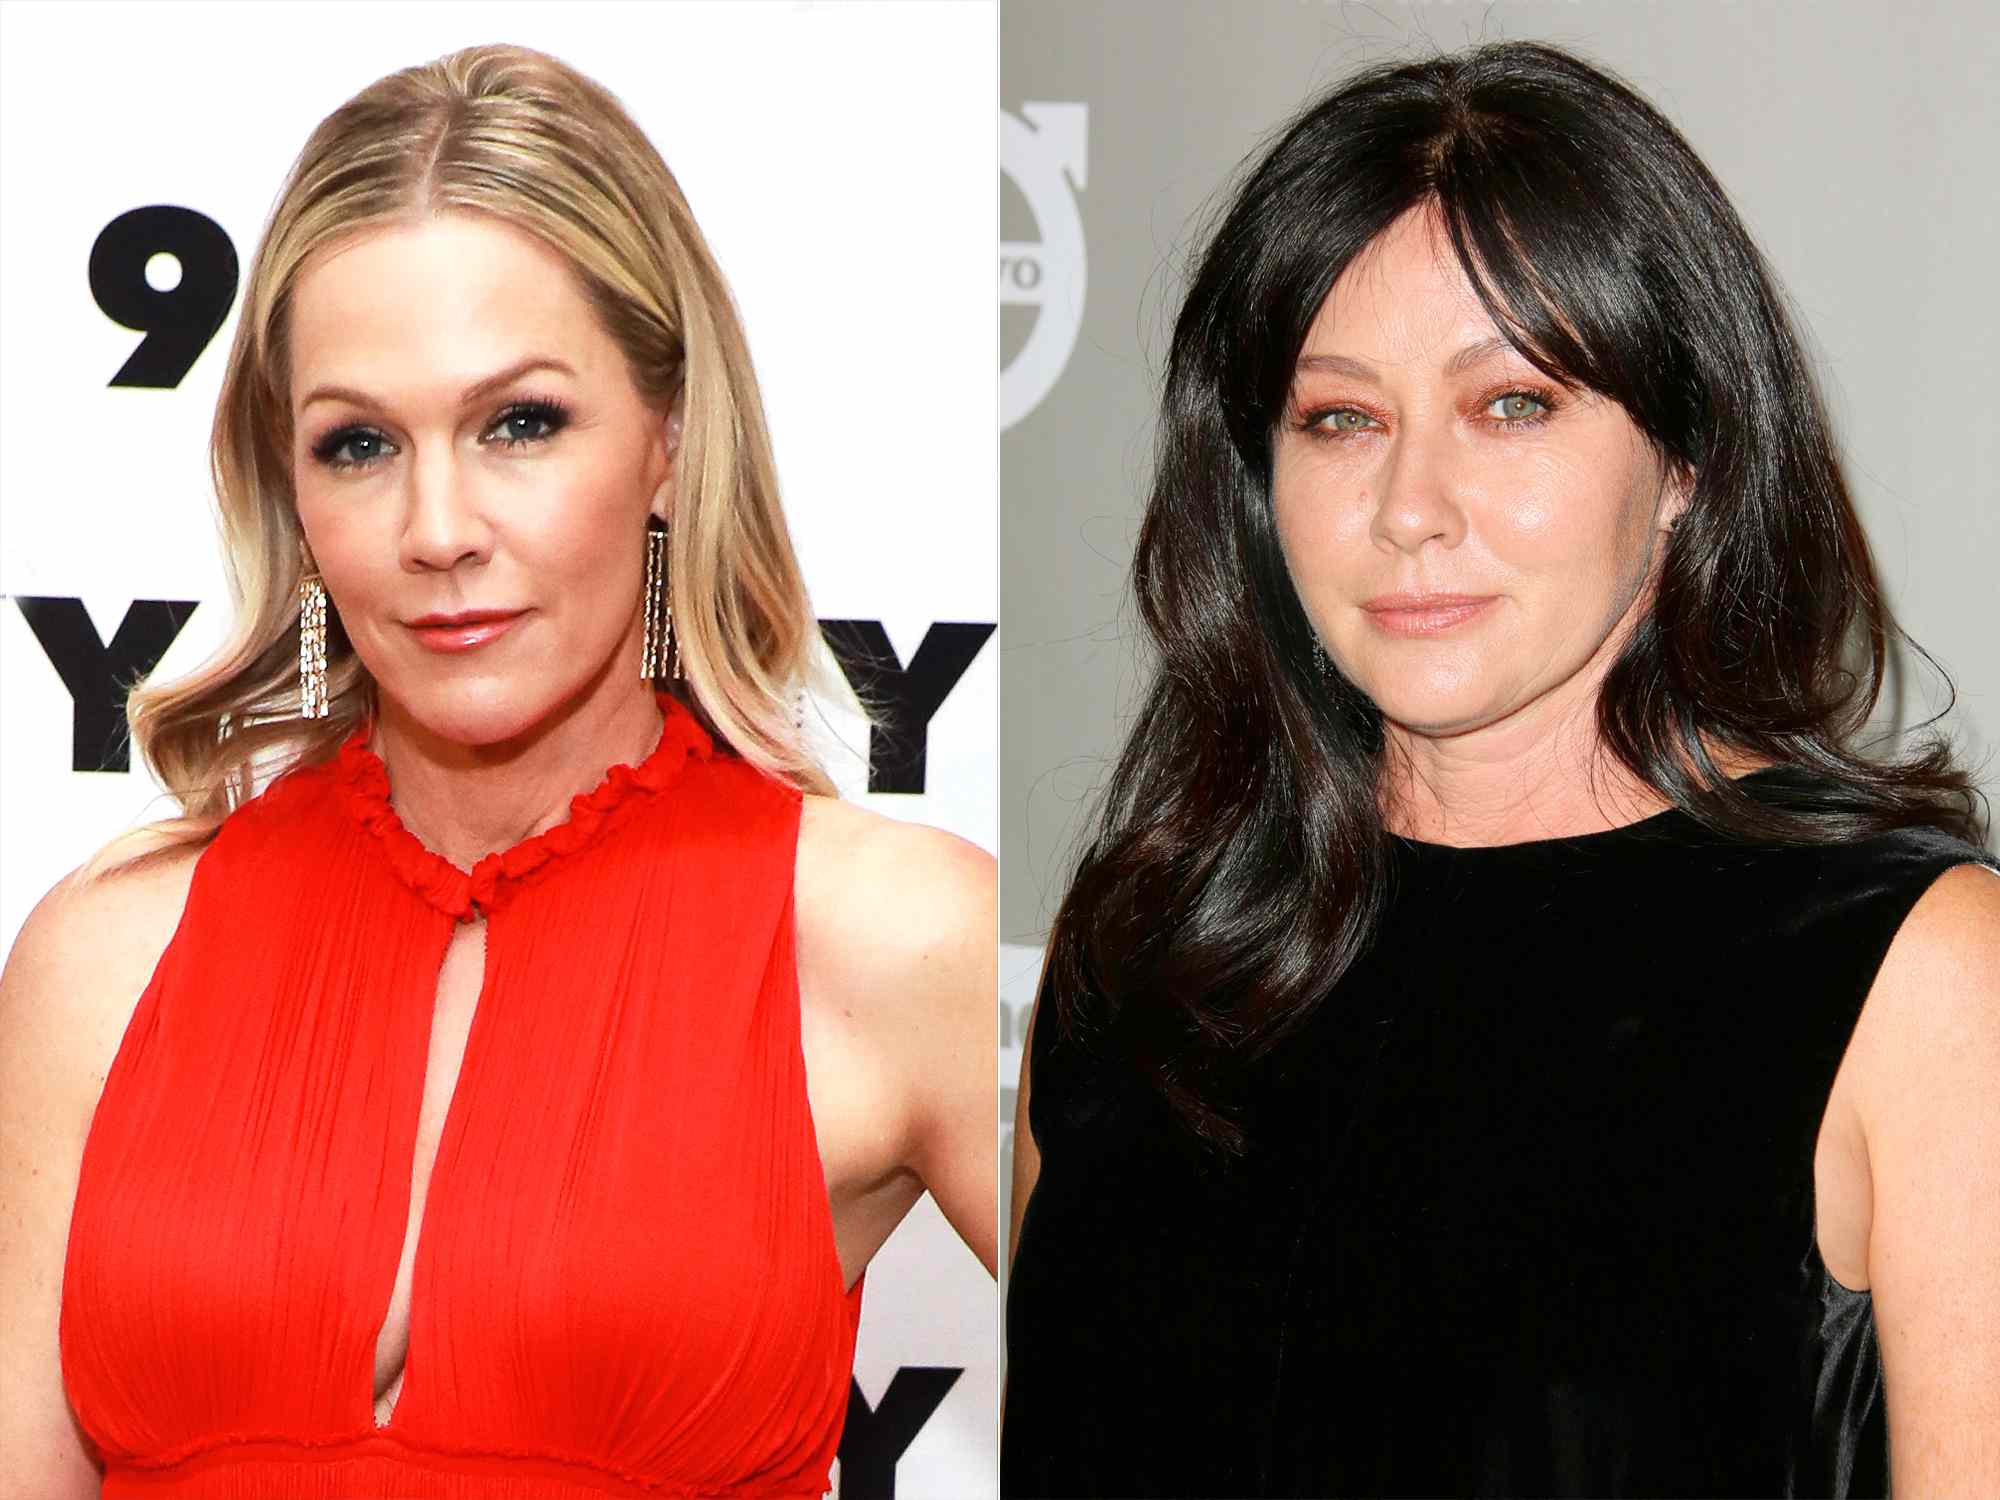 Shannen Doherty Says Relationship with Jennie Garth Is Now 'Good' After Past Drama: I Don't 'Hold Any Grudges'